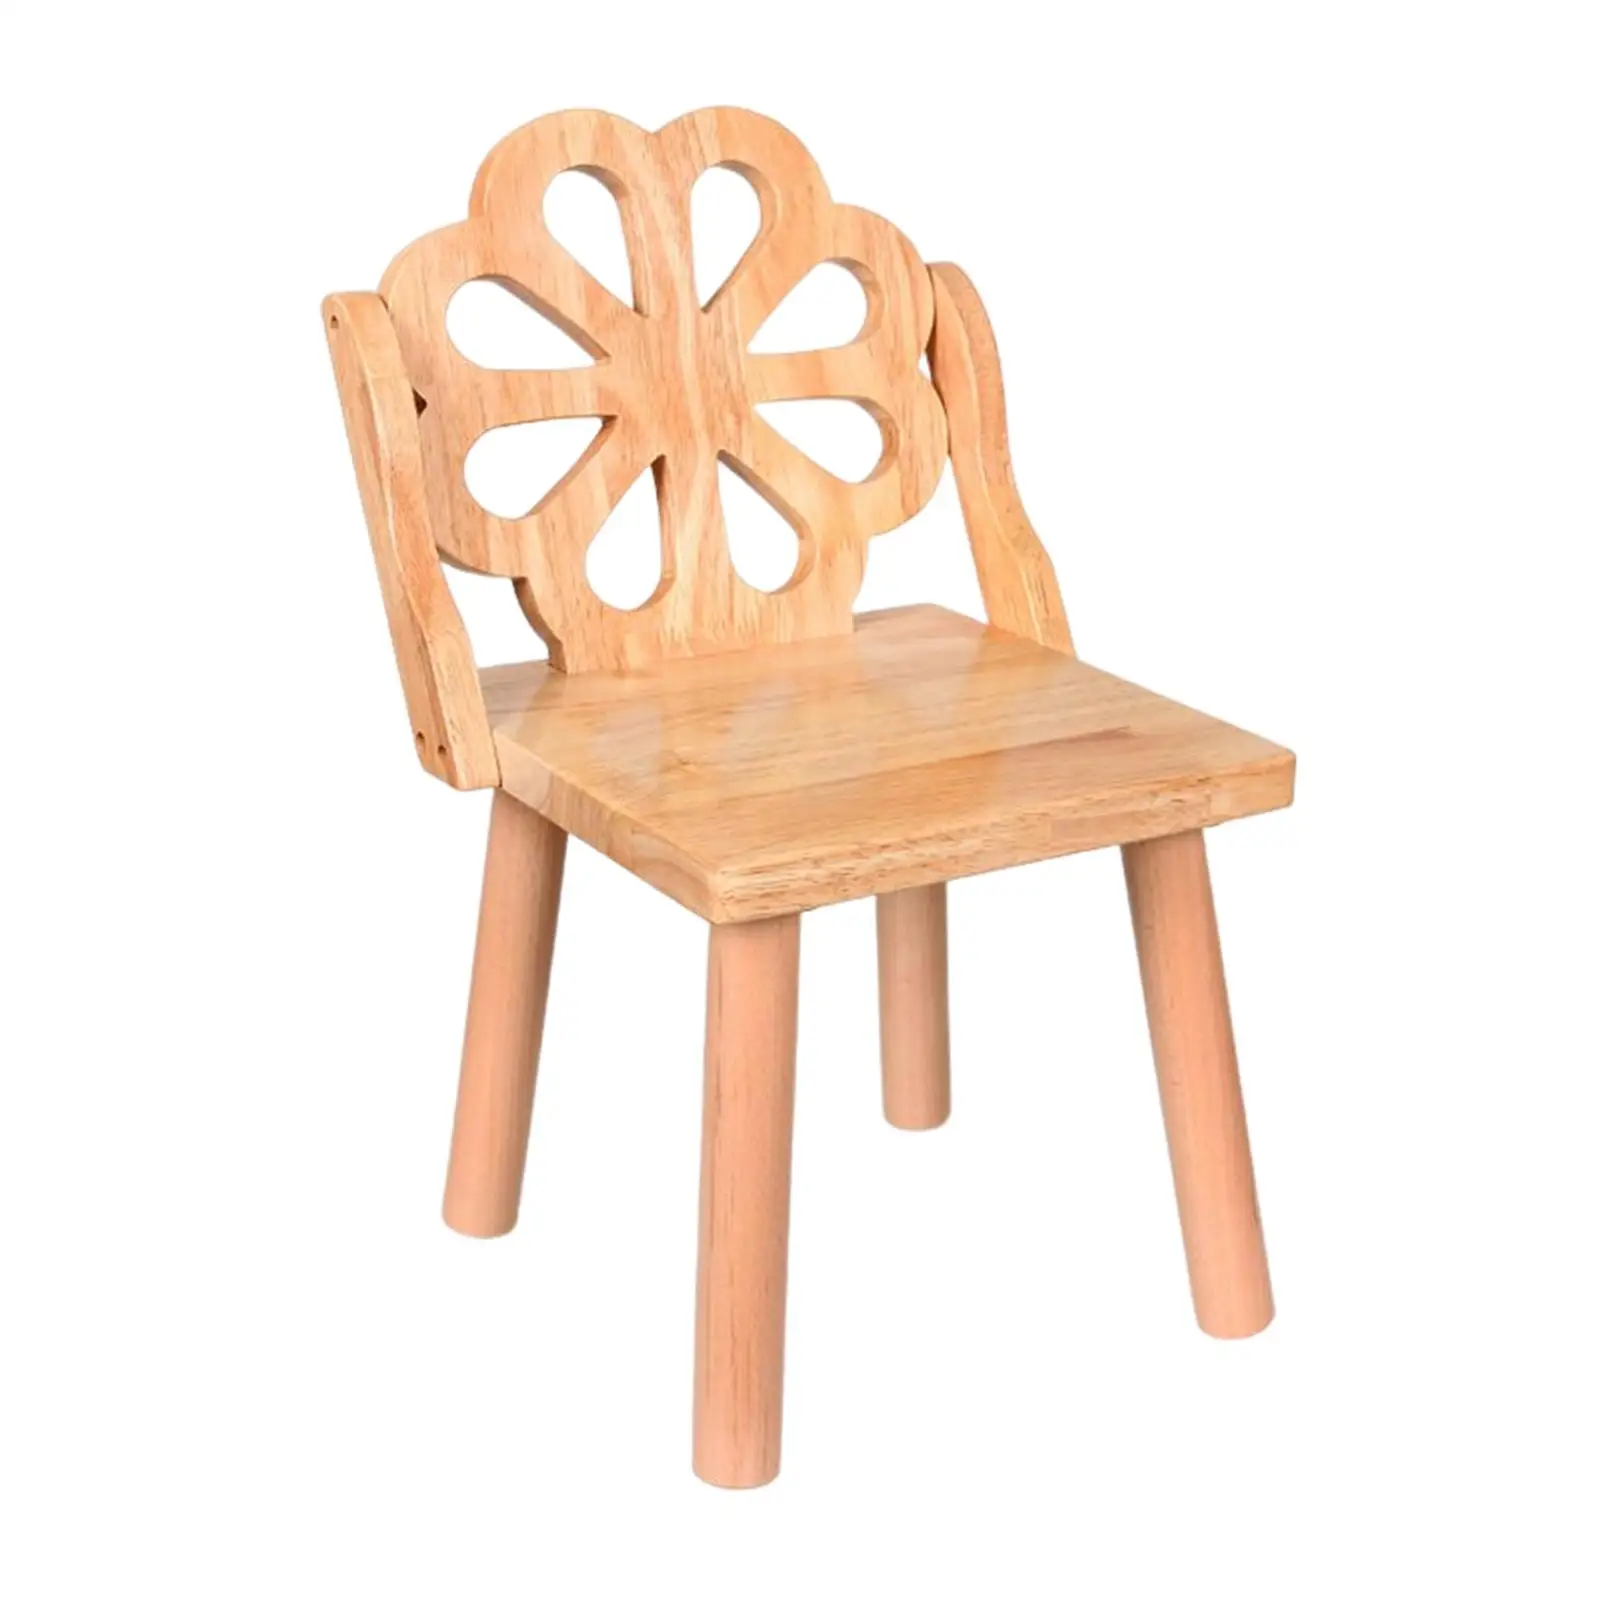 Household Removable Wooden Child Stool Heavy Duty Lightweight Durable Wood